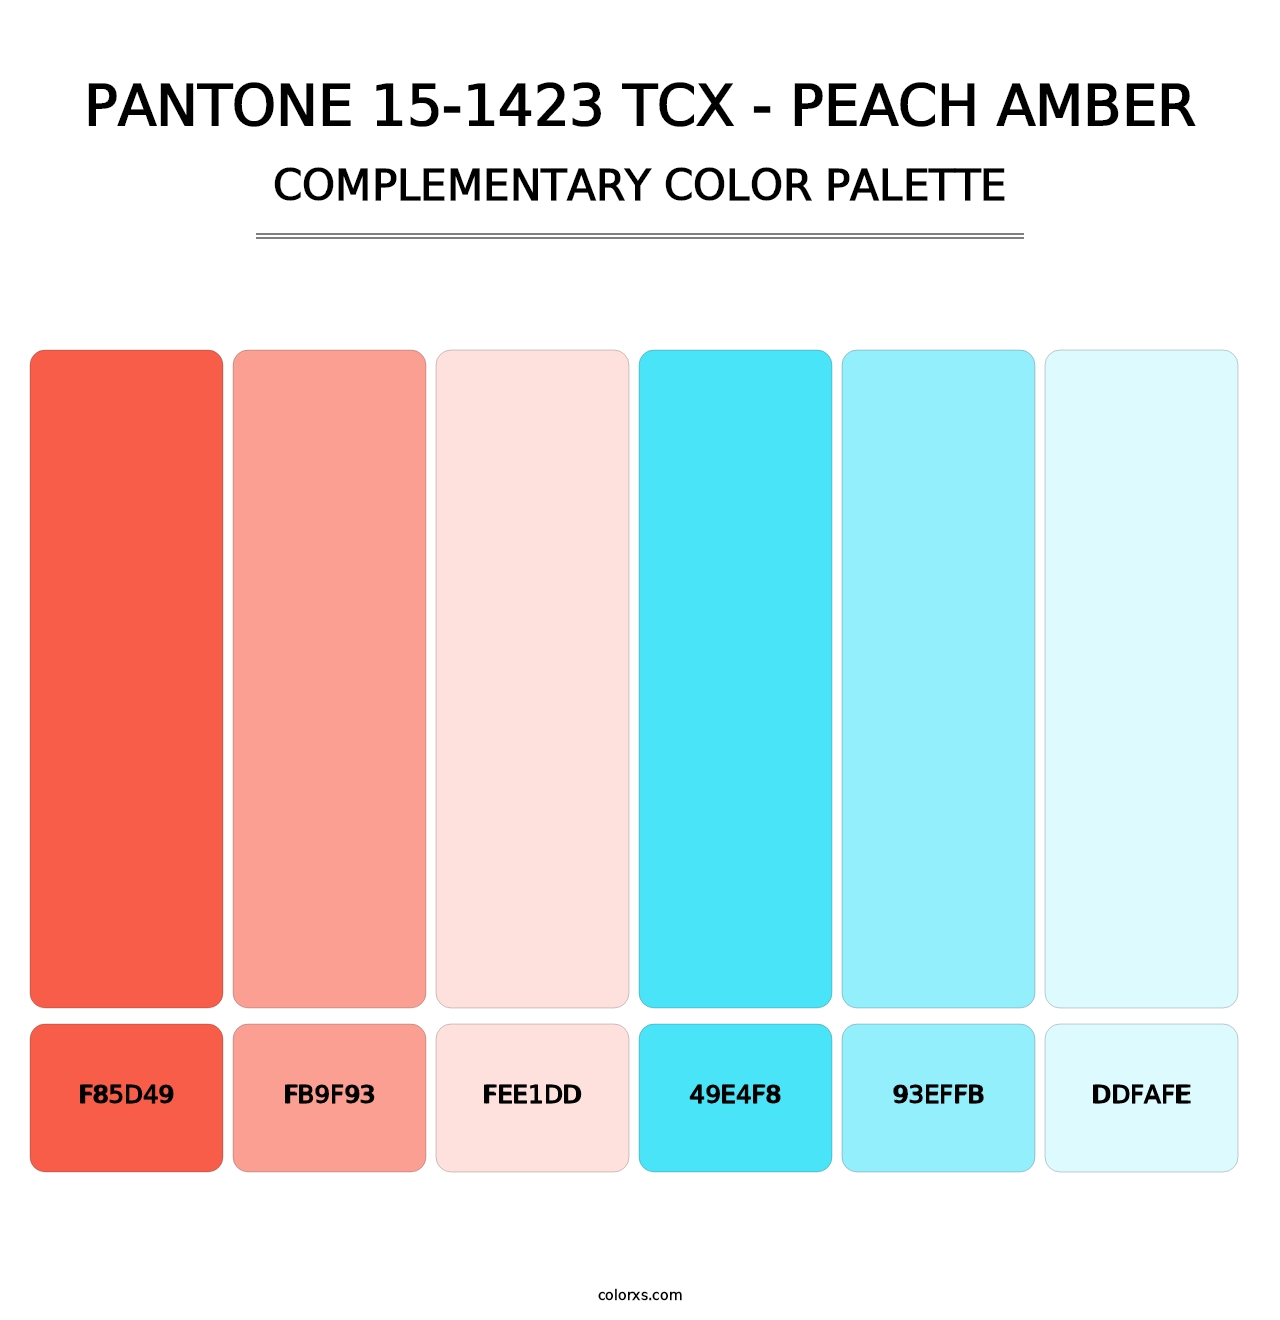 PANTONE 15-1423 TCX - Peach Amber - Complementary Color Palette